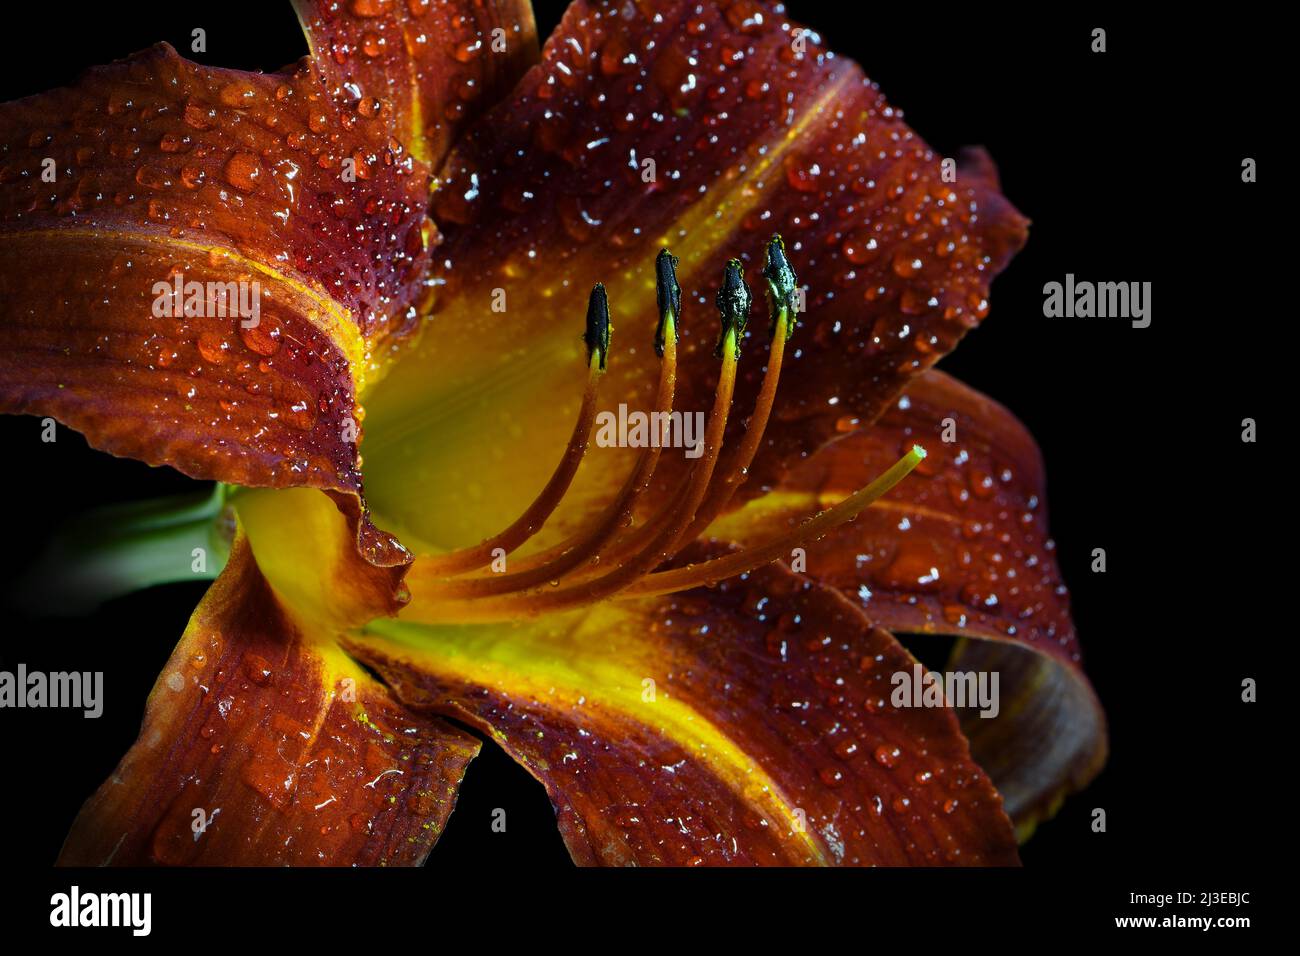 A close-up of a wet rusty red coloured Day Lily -Hemerocallis family- flower in soft, strong dark mood lighting with the Stigma lit up Stock Photo